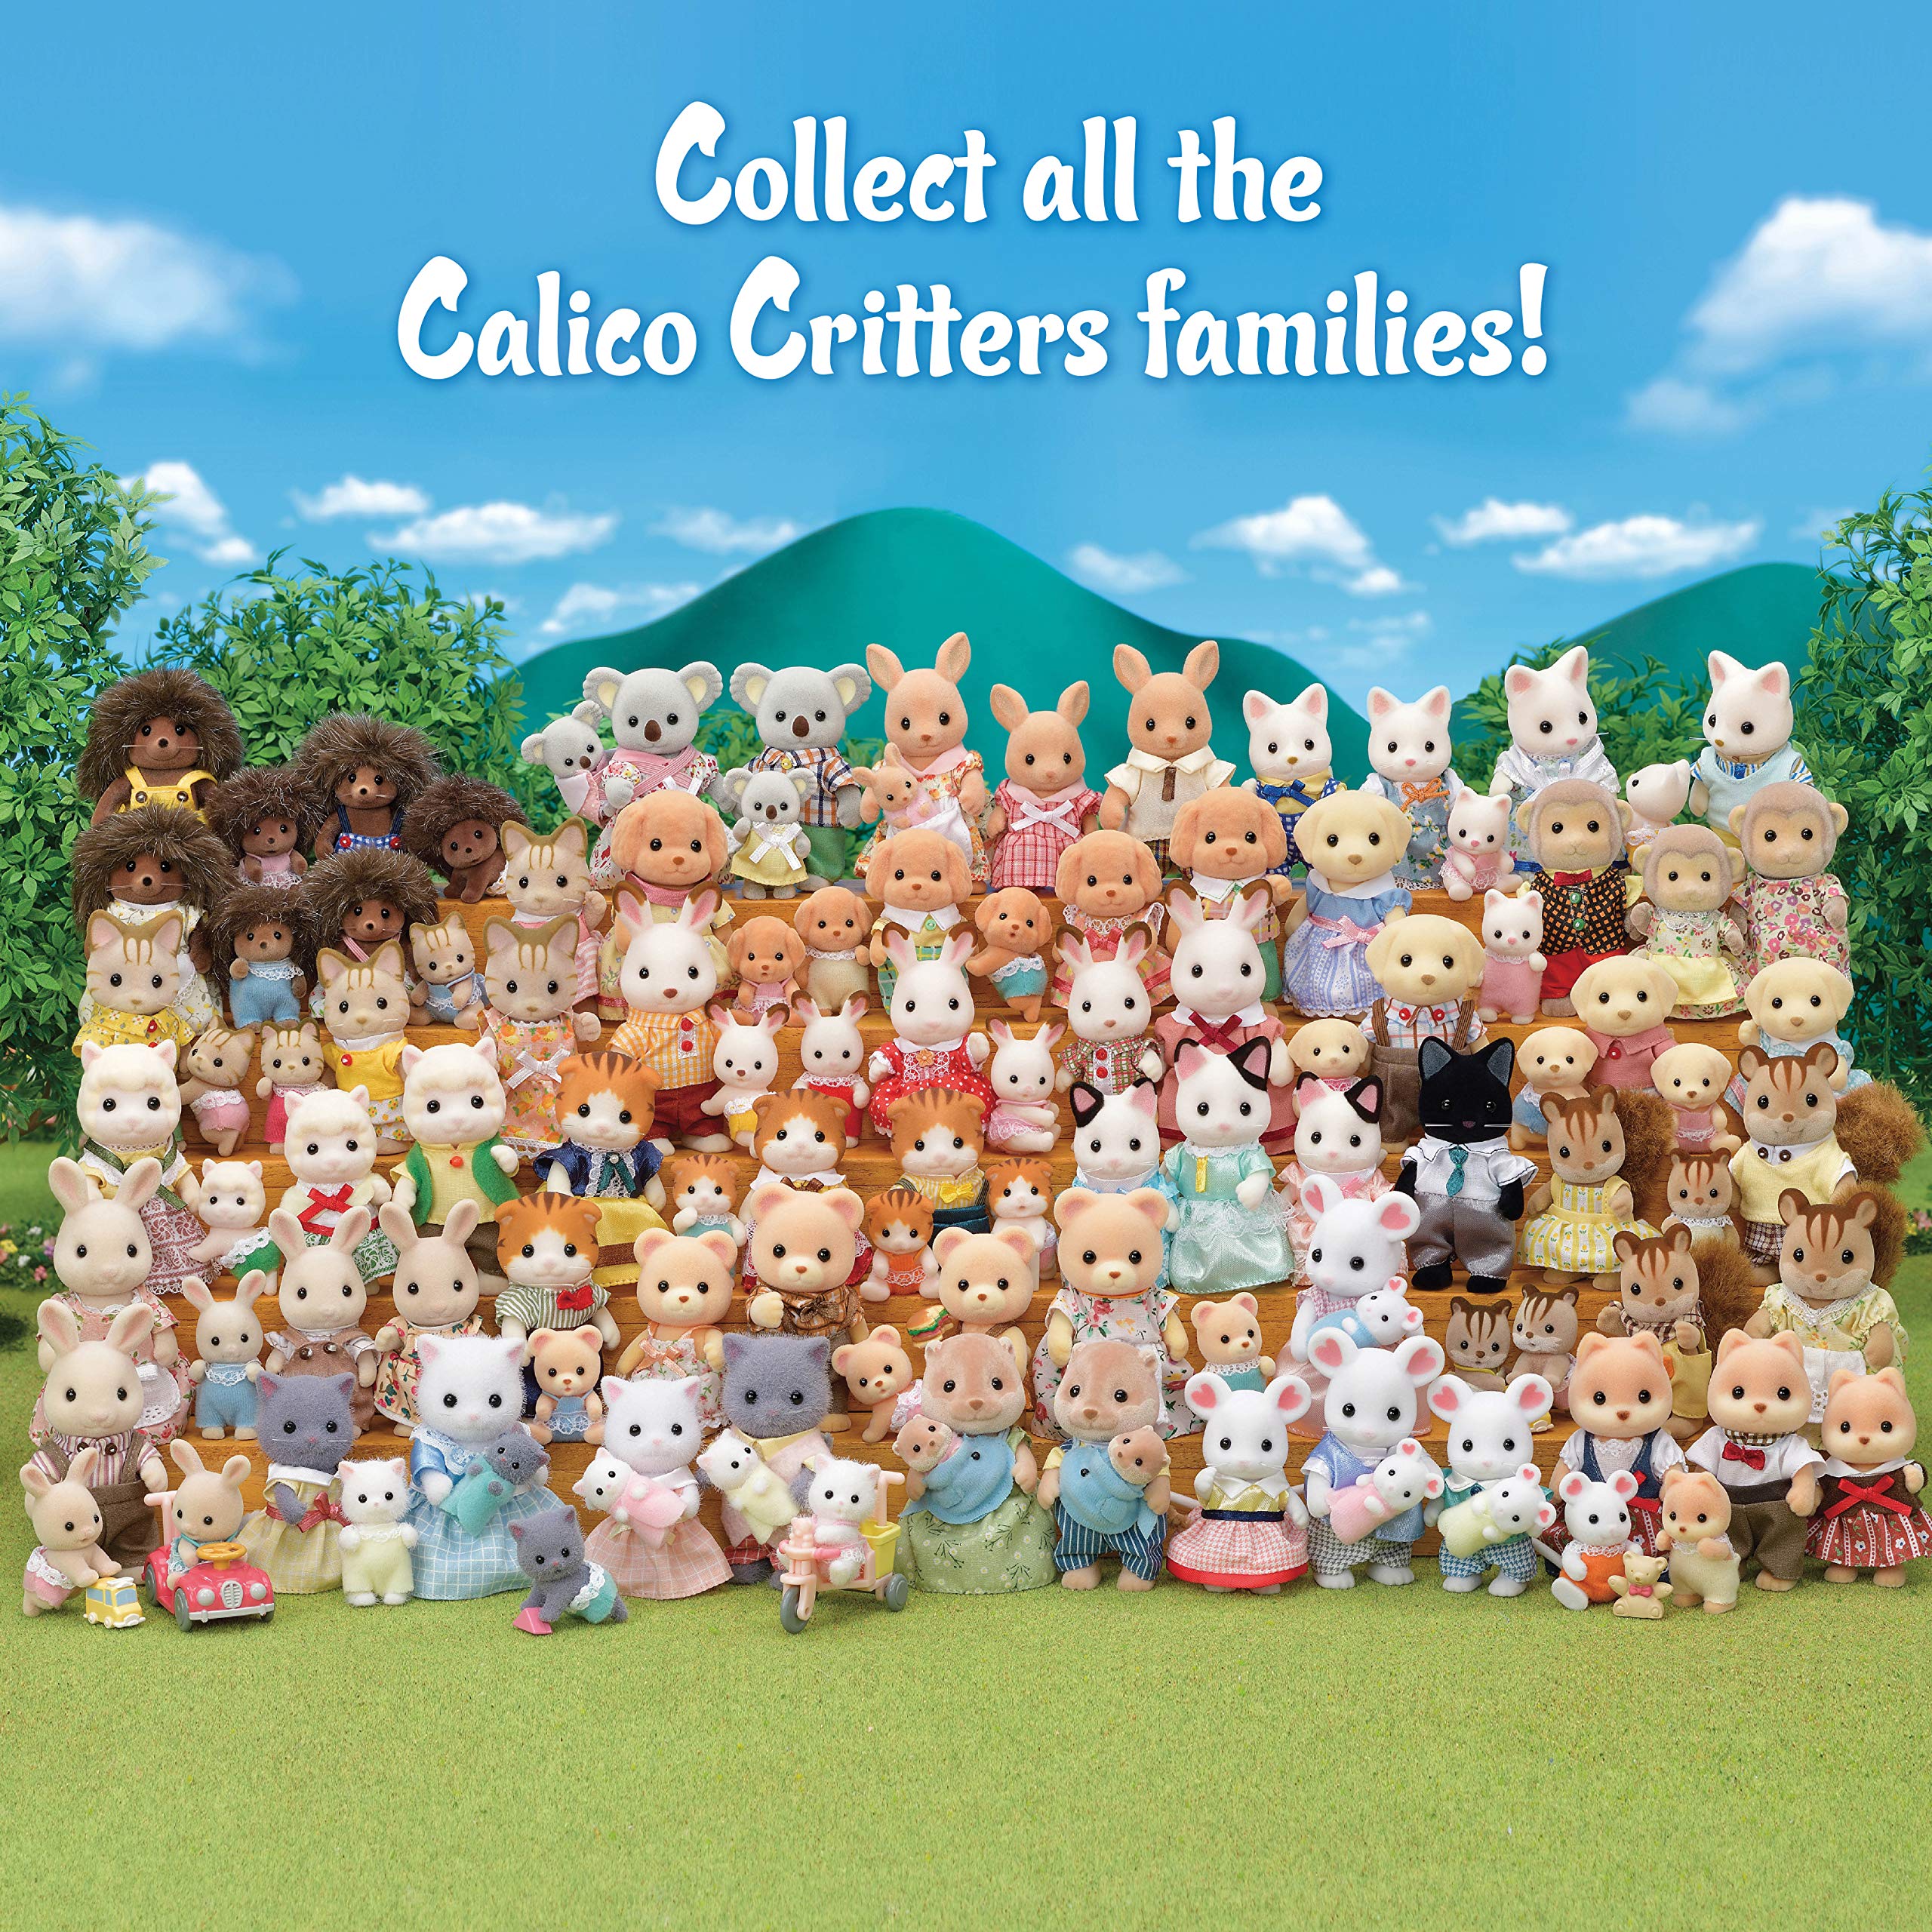 Calico Critters Yellow Labrador Family, Dolls, Dollhouse Figures, Collectible Toys